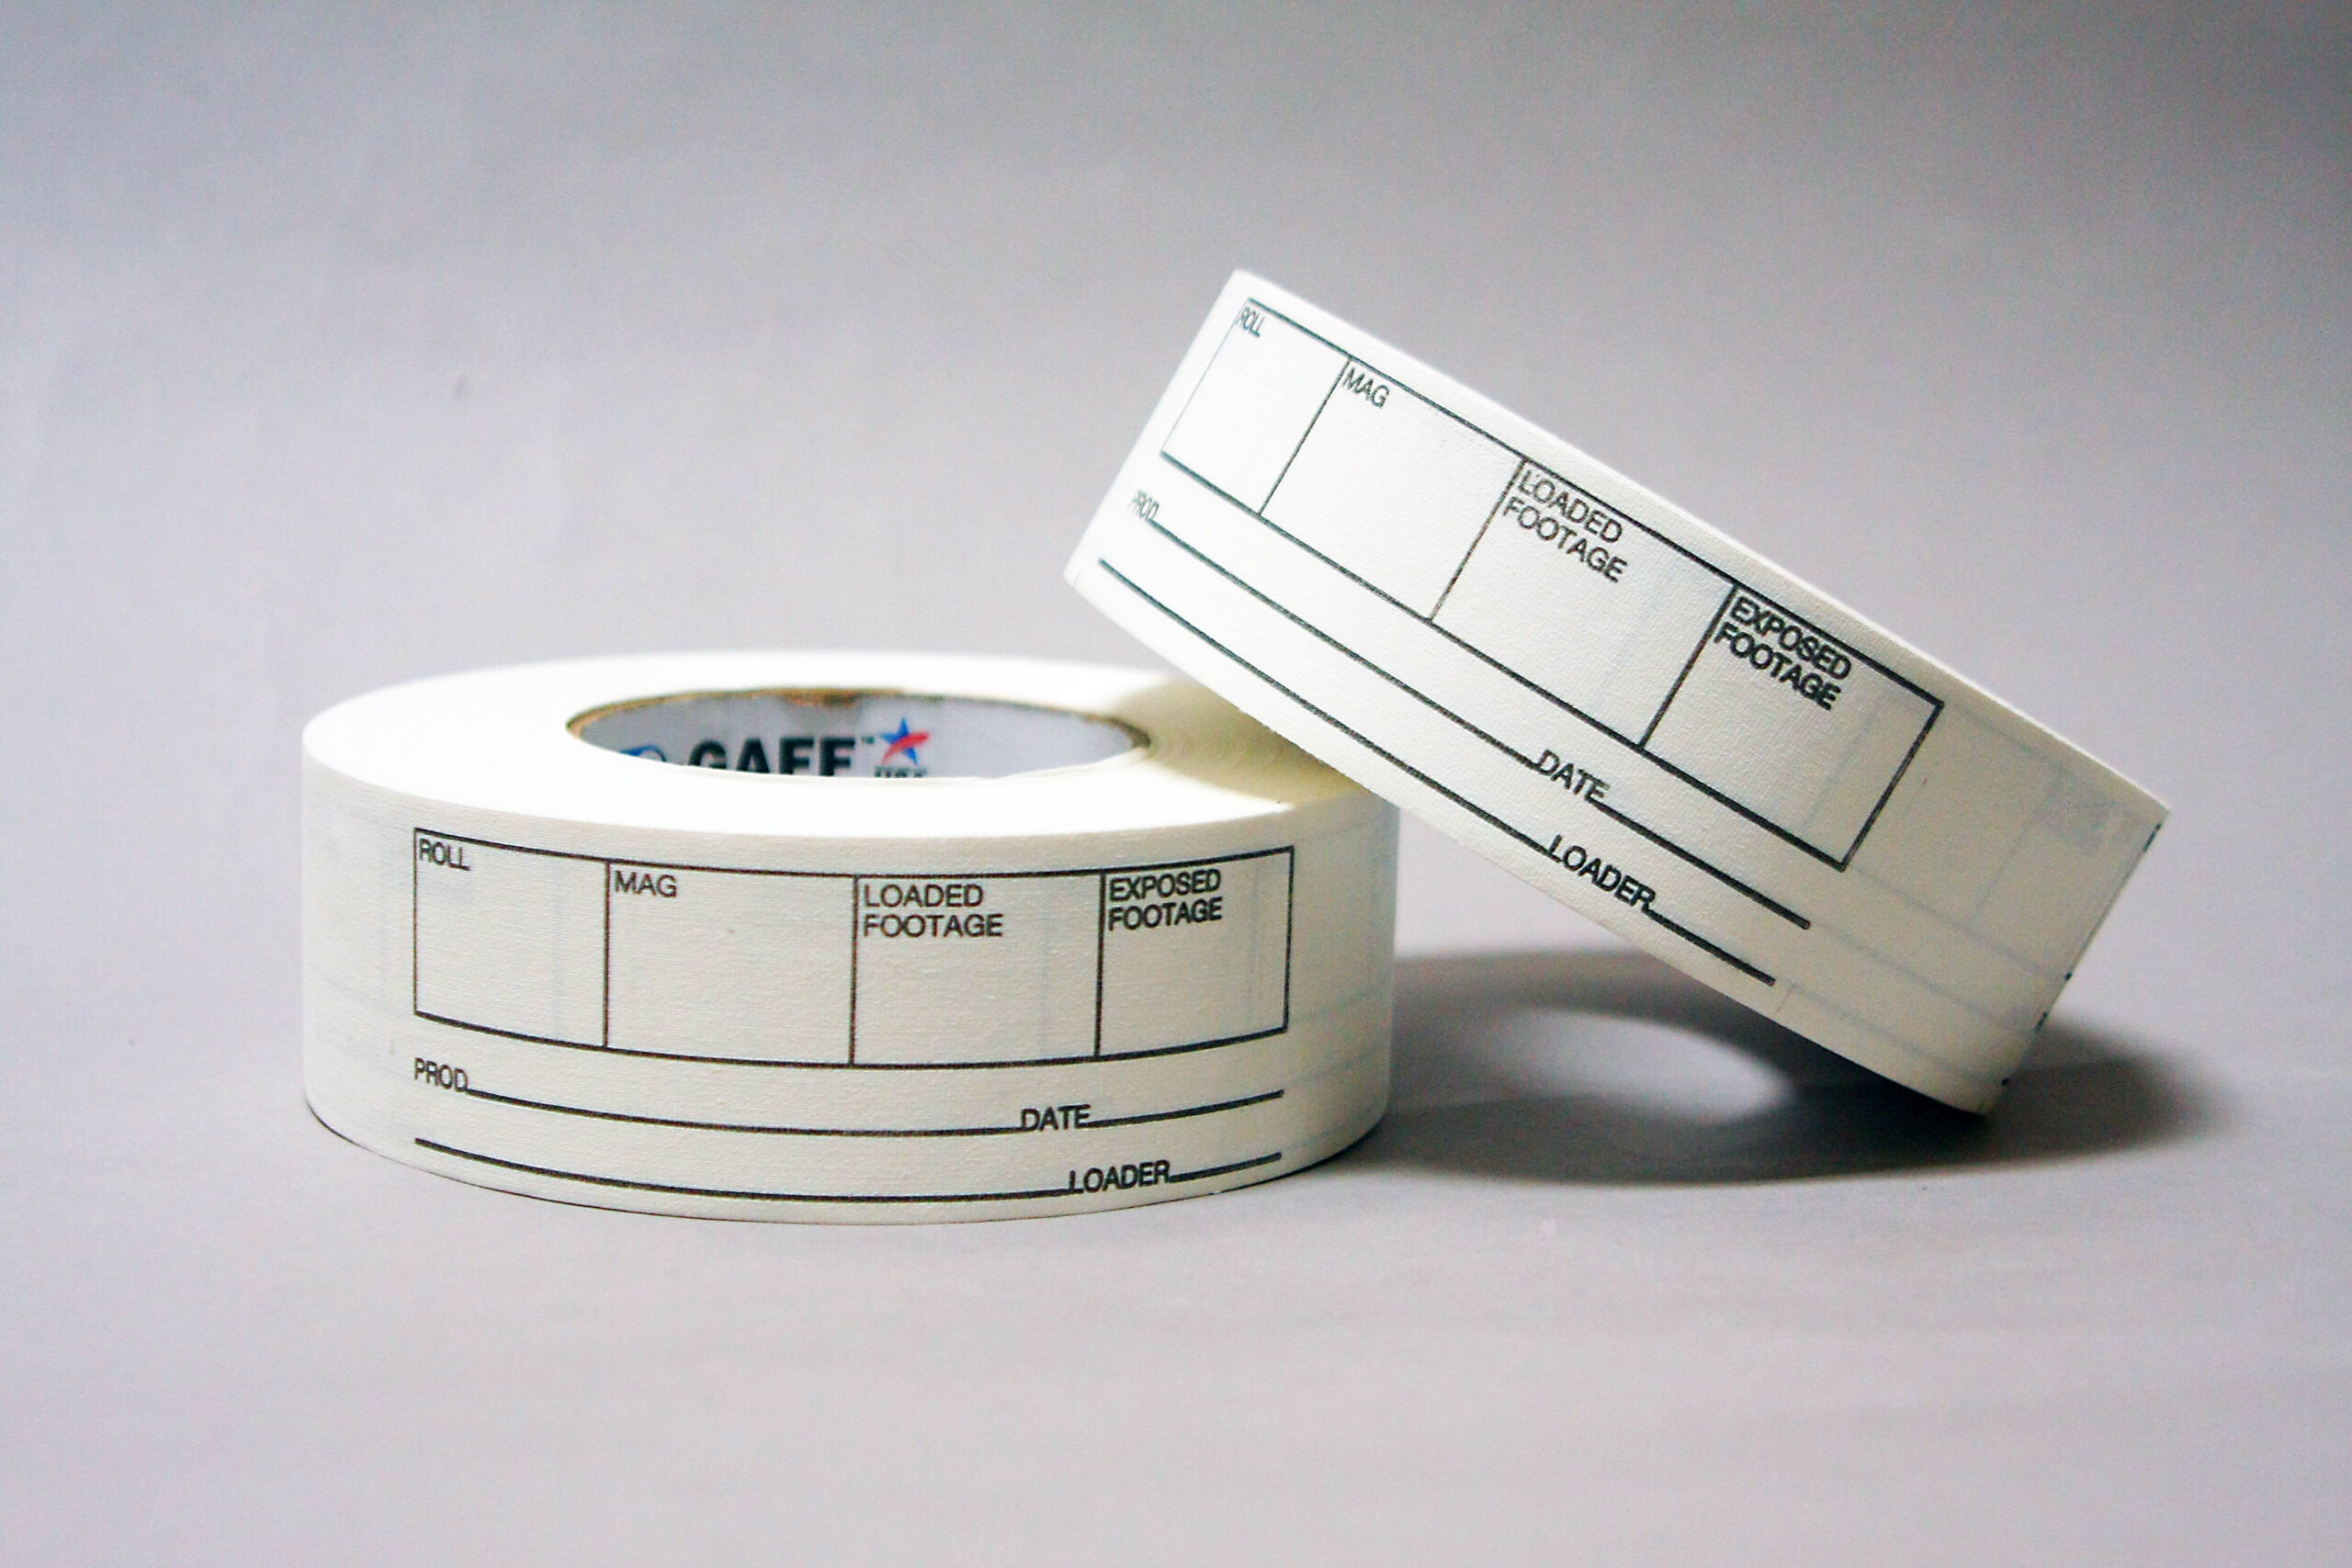 Labeling Tape